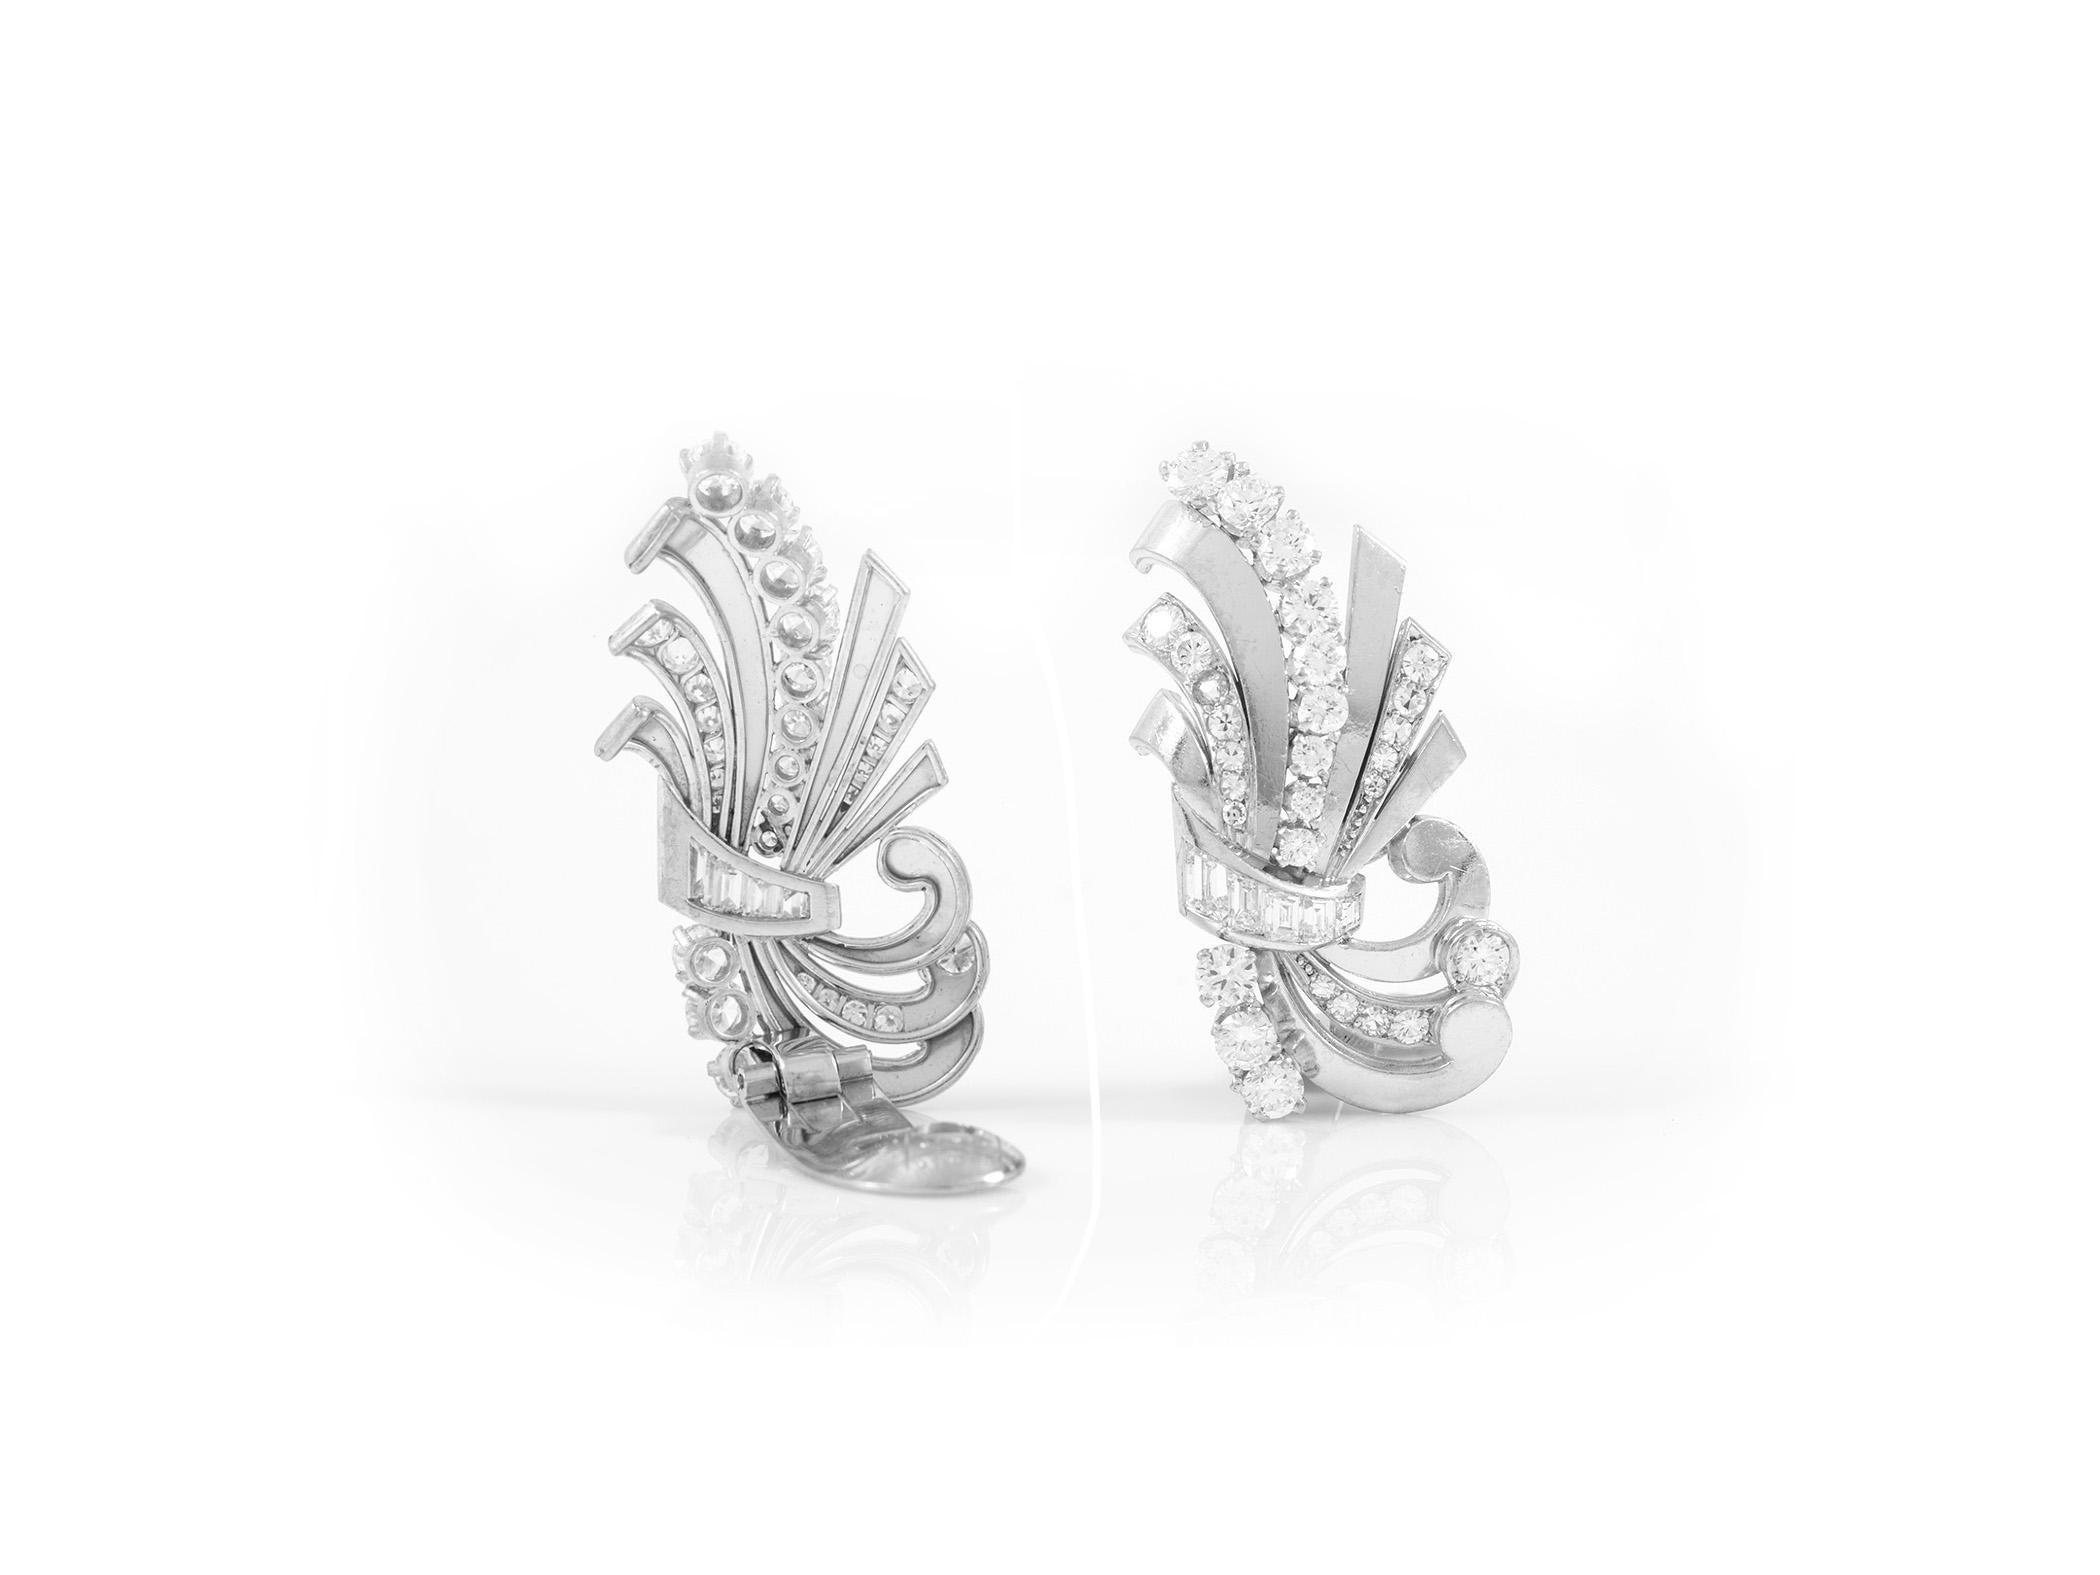 The earrings are finely crafted in platinum with diamonds weighing approximately total of 5.50 carat.